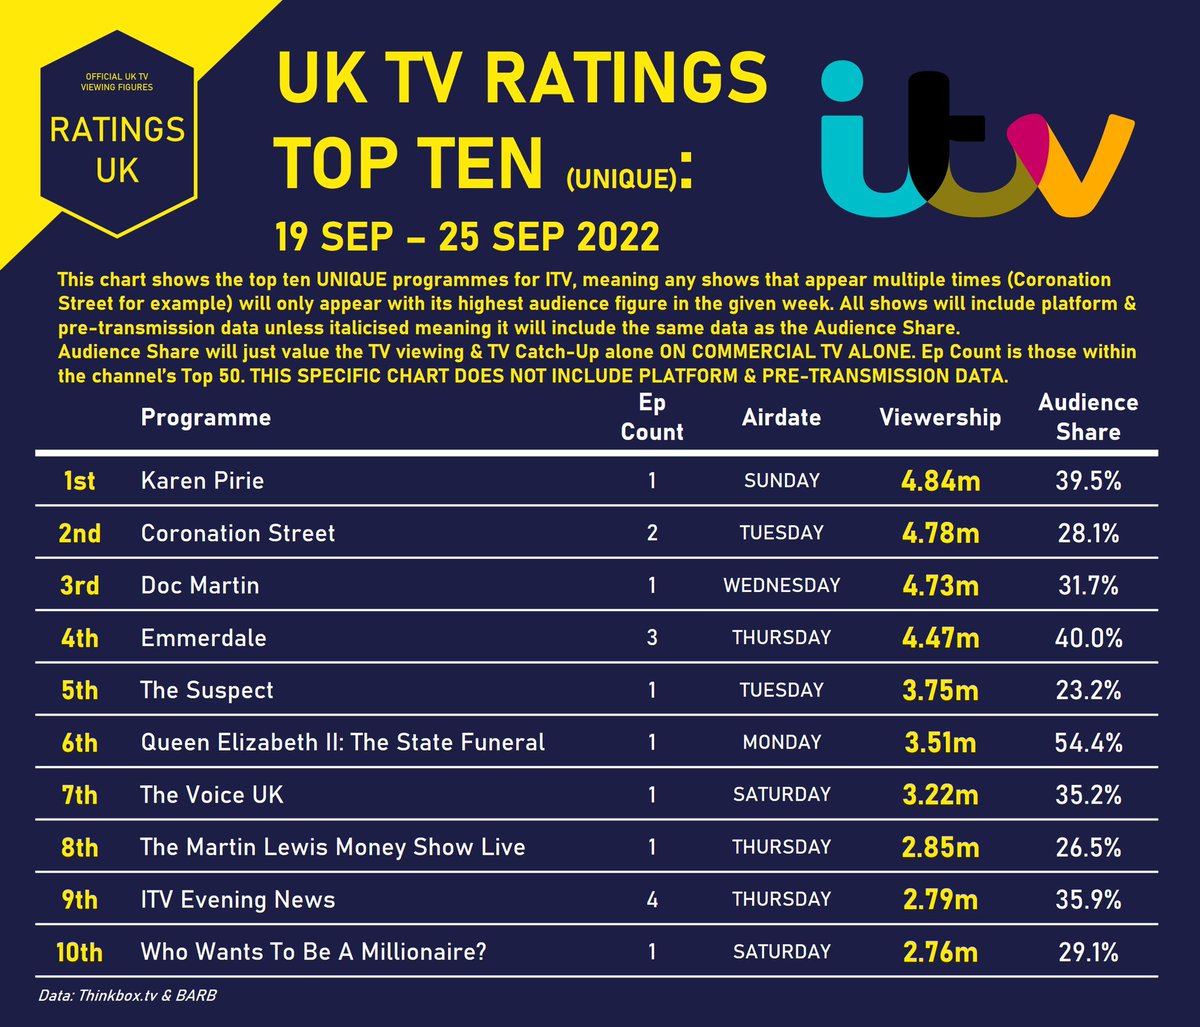 OFFICIAL FIGURES ITV (no platform data):
#KarenPirie makes its debut with 4.84m to top the chart this week. Elsewhere, #MartinLewis climbs with almost 2.9m viewers.